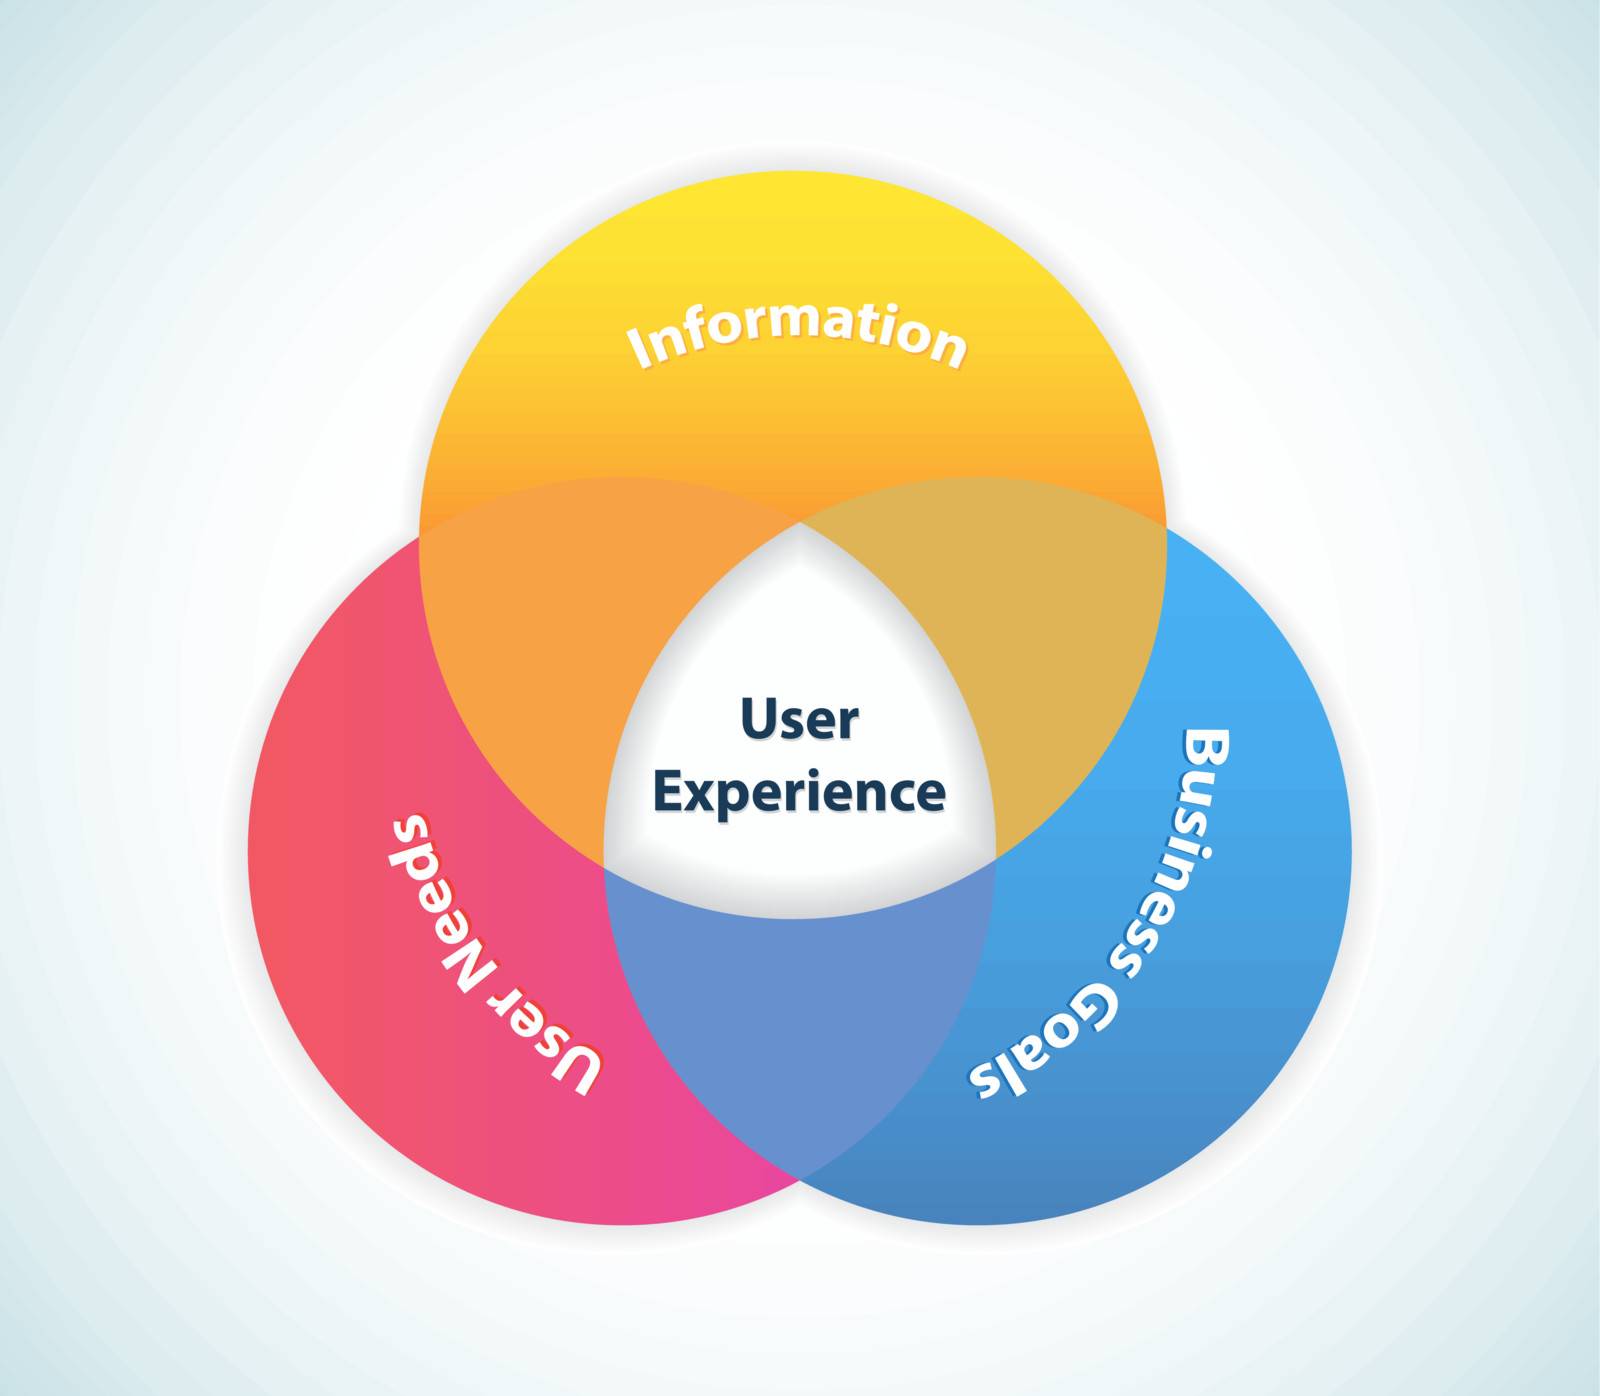 This image represents a user experience design areas./User Experience Design